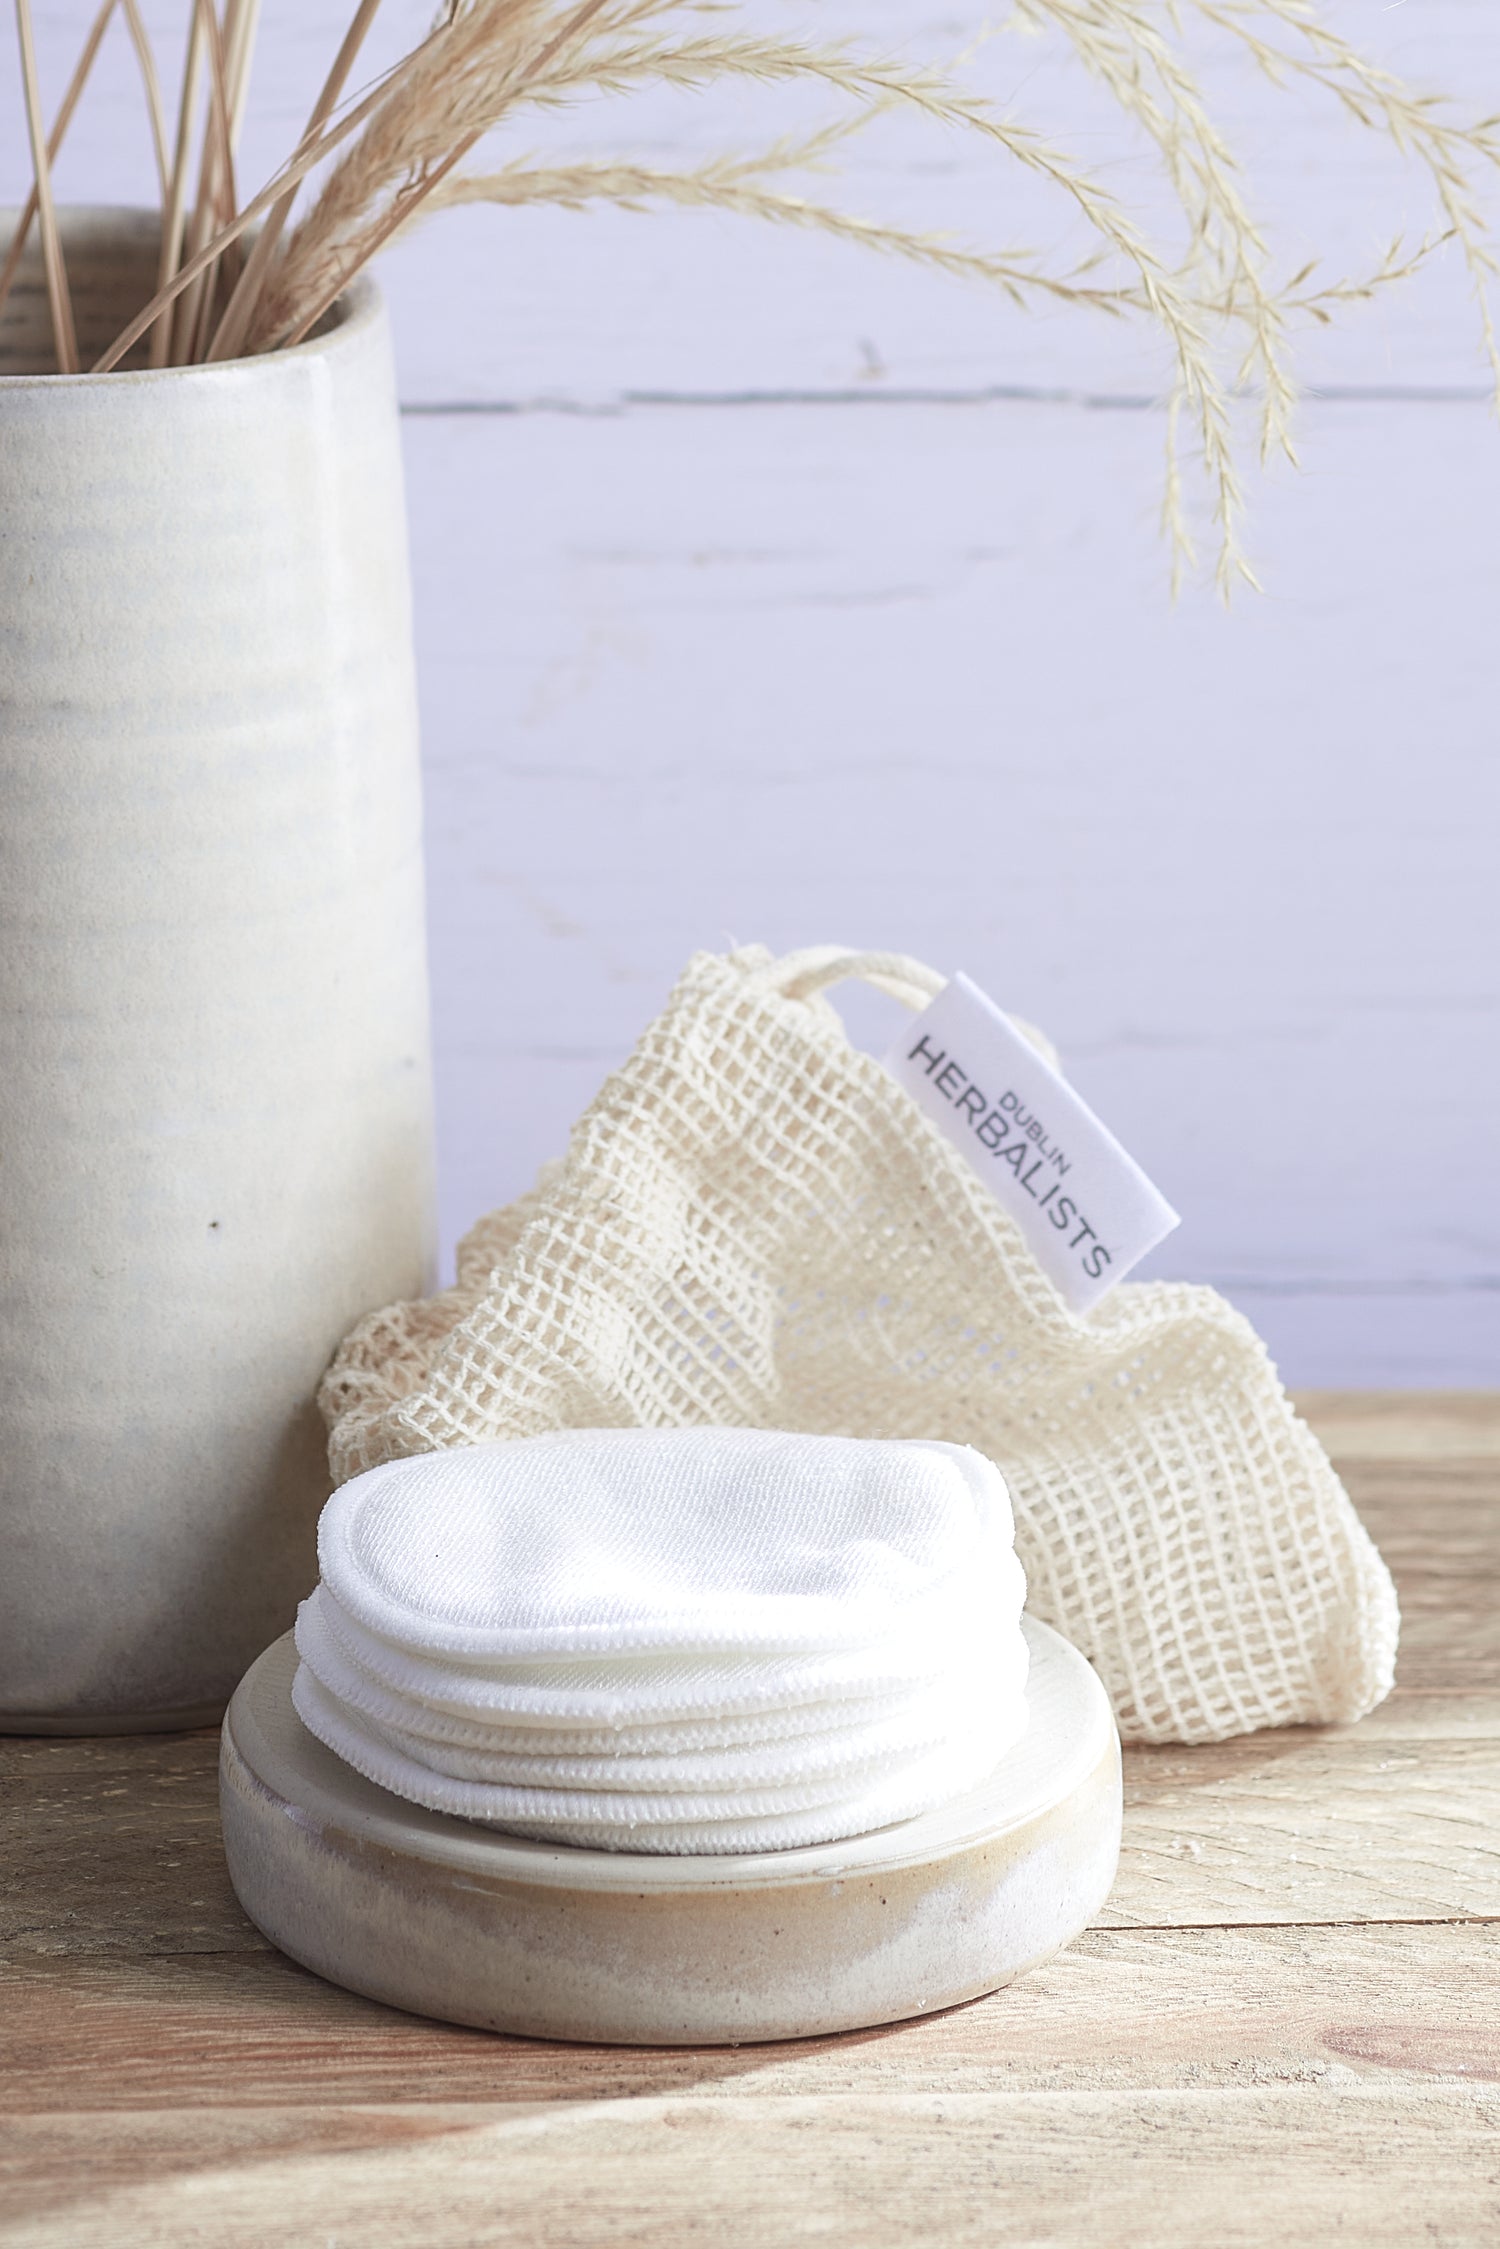 Reusable make-up remover cotton pads